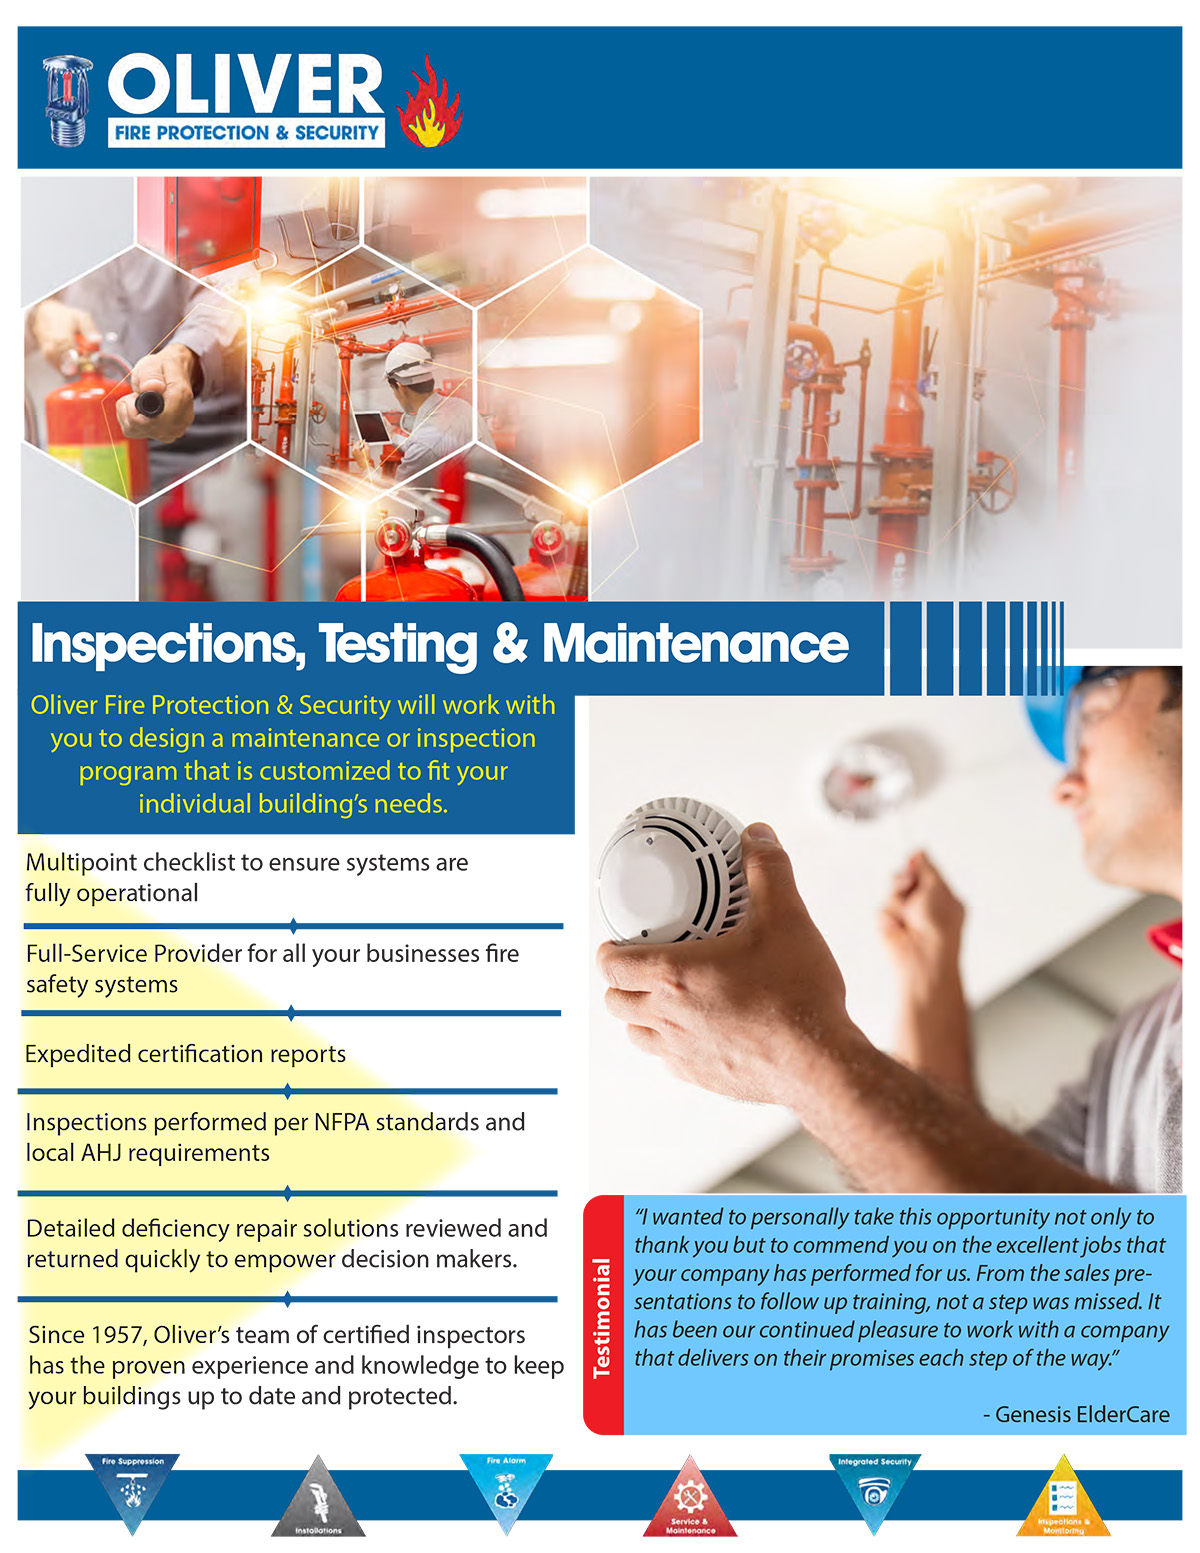 Inspections, Testing and Maintenance